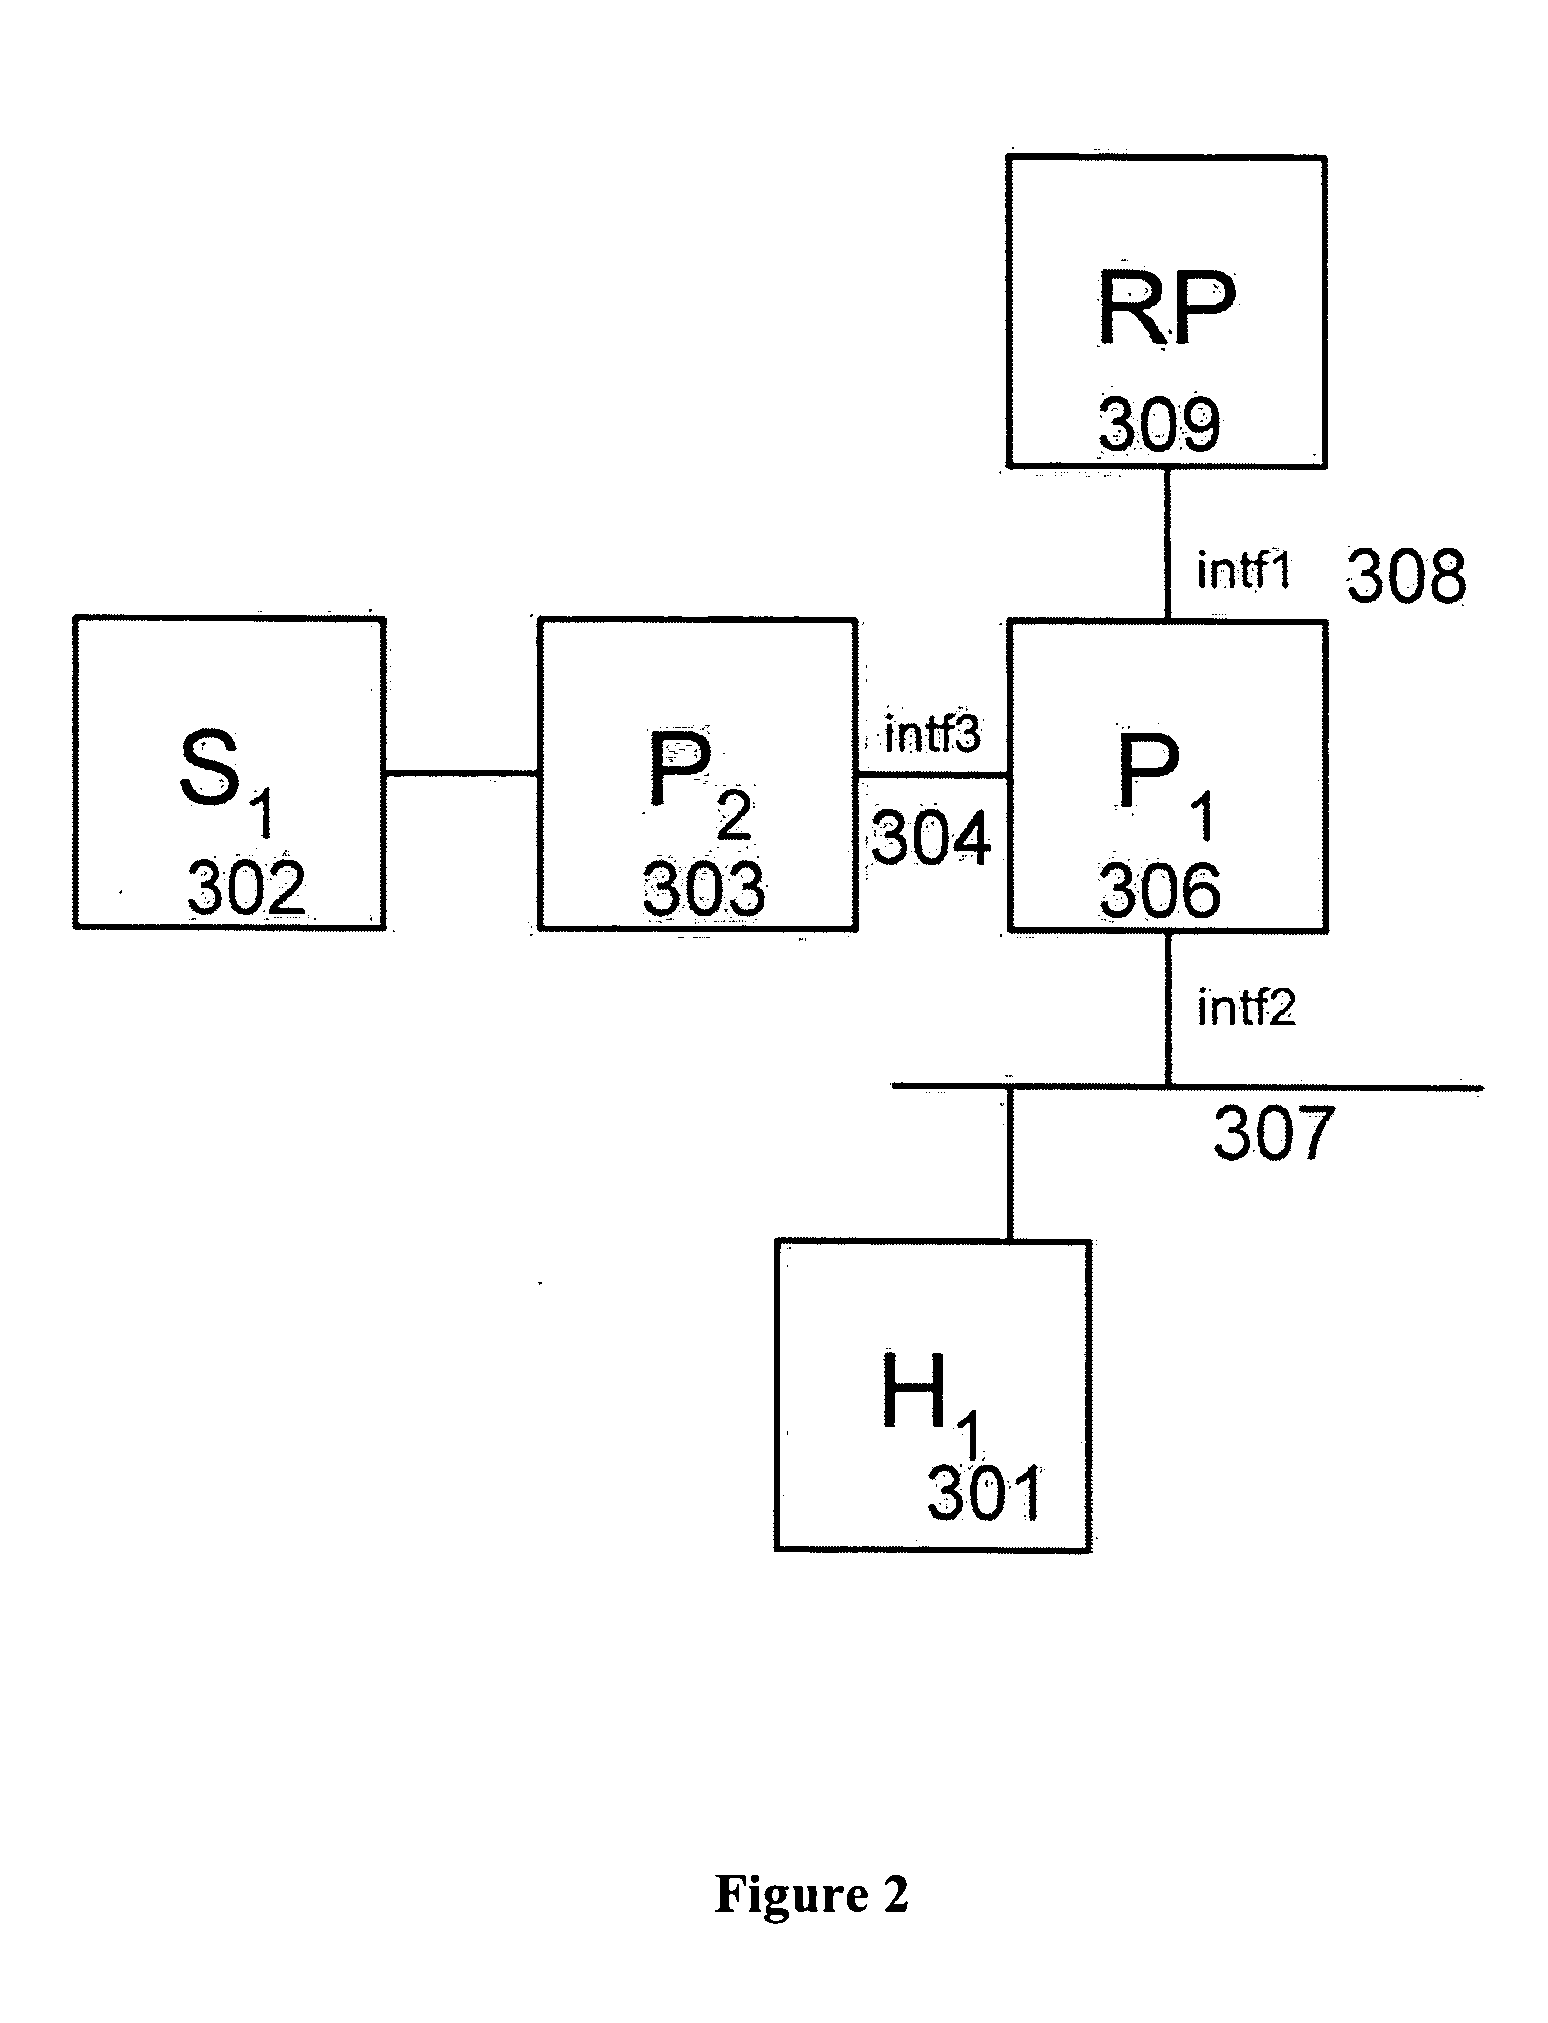 Systems and methods for multicast routing on packet switched networks